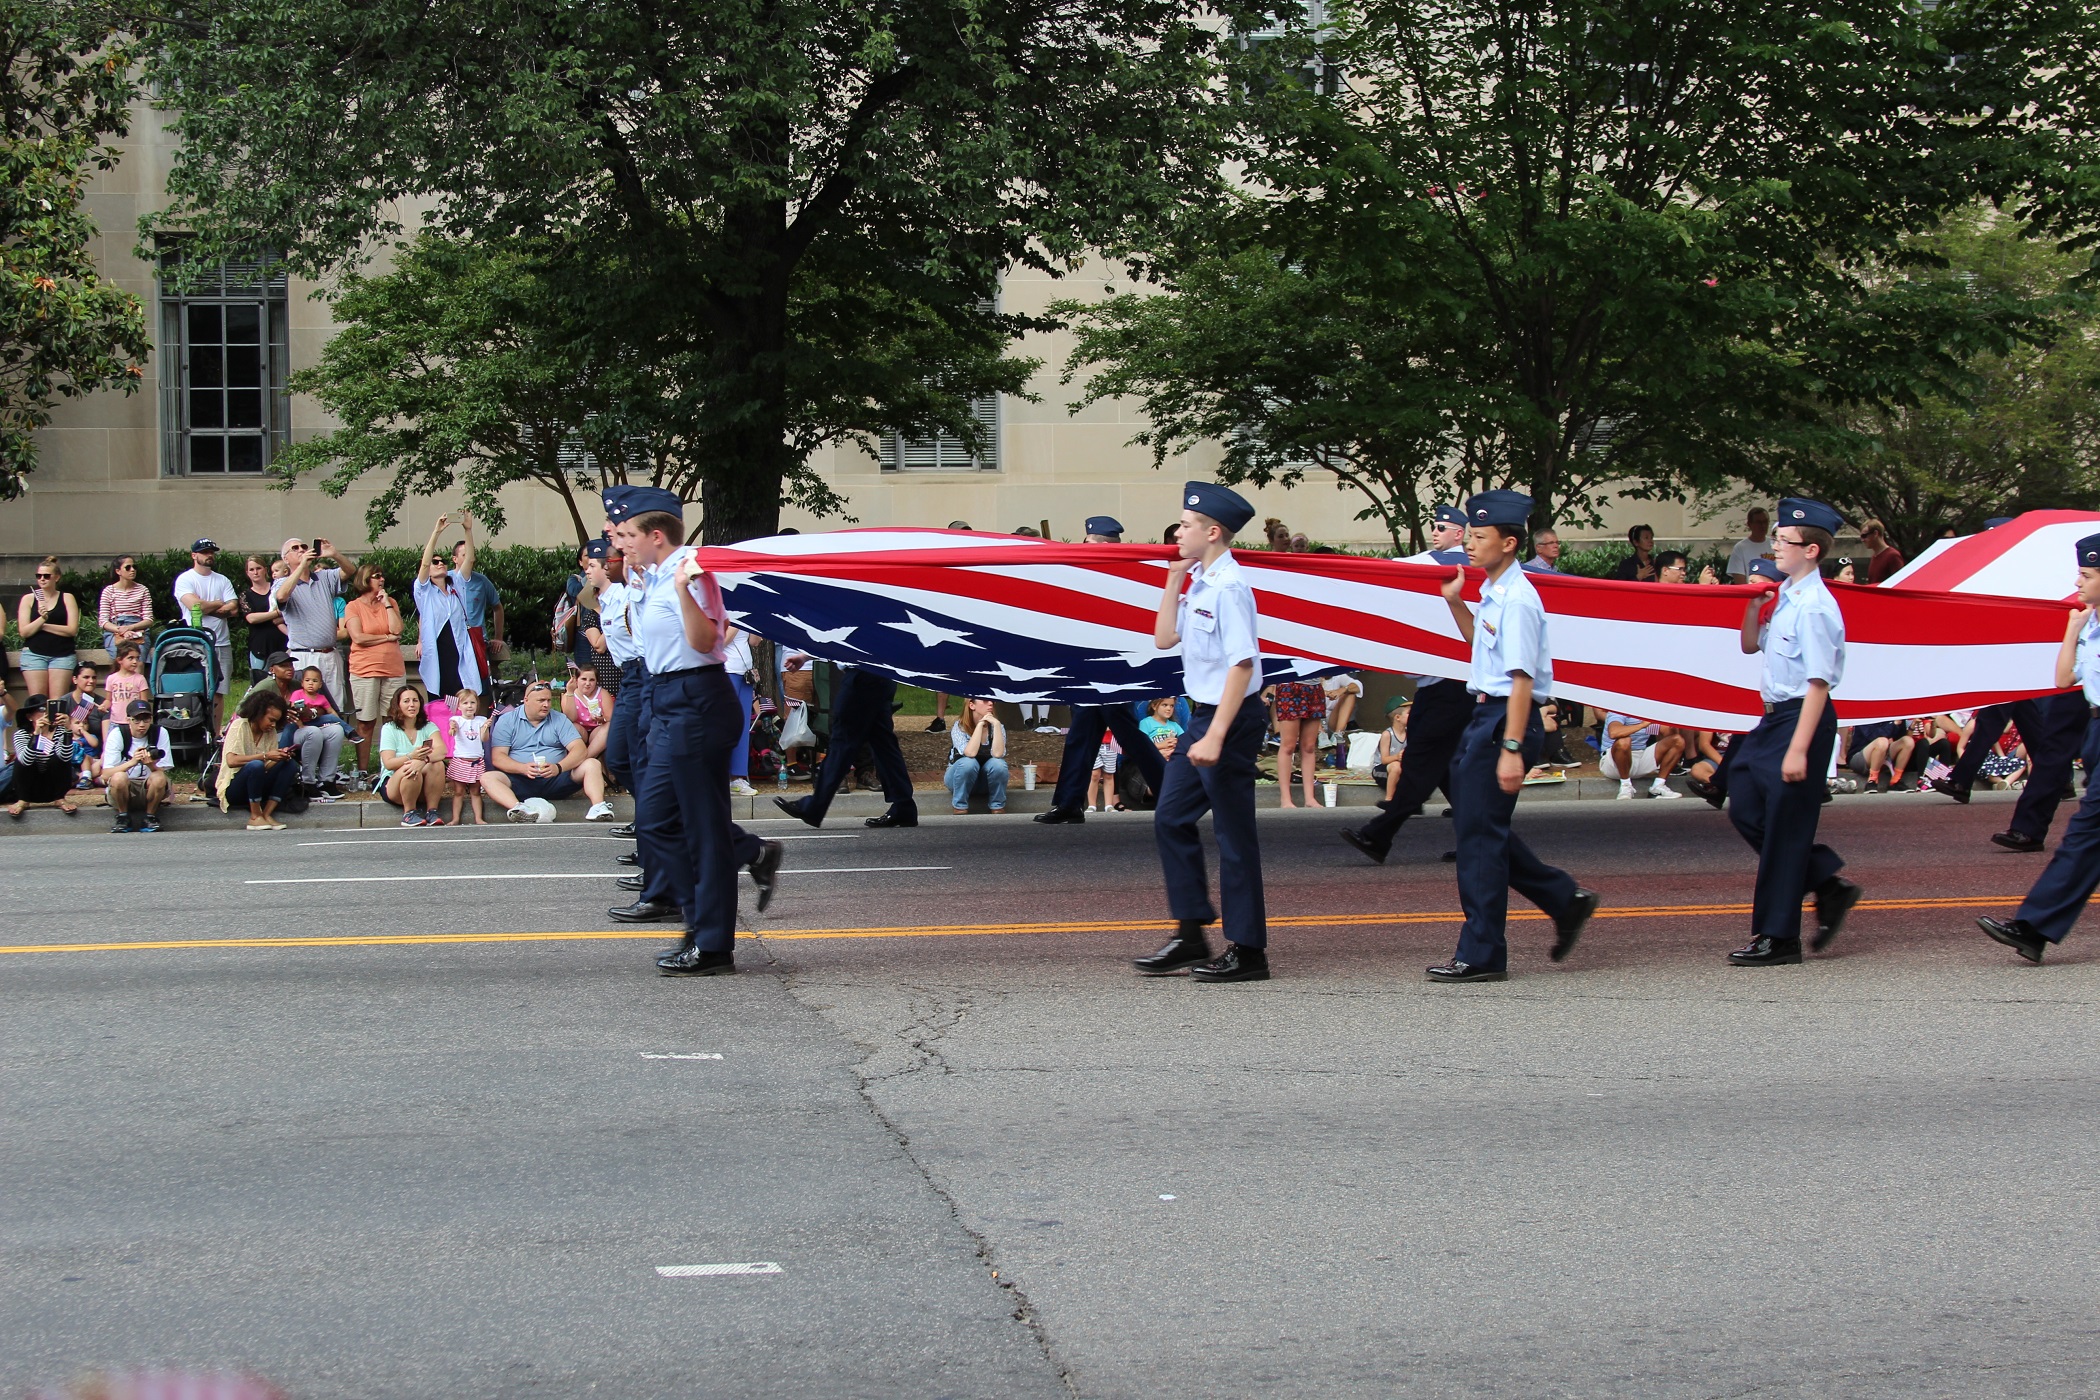 A group of people in uniform carrying an american flag.